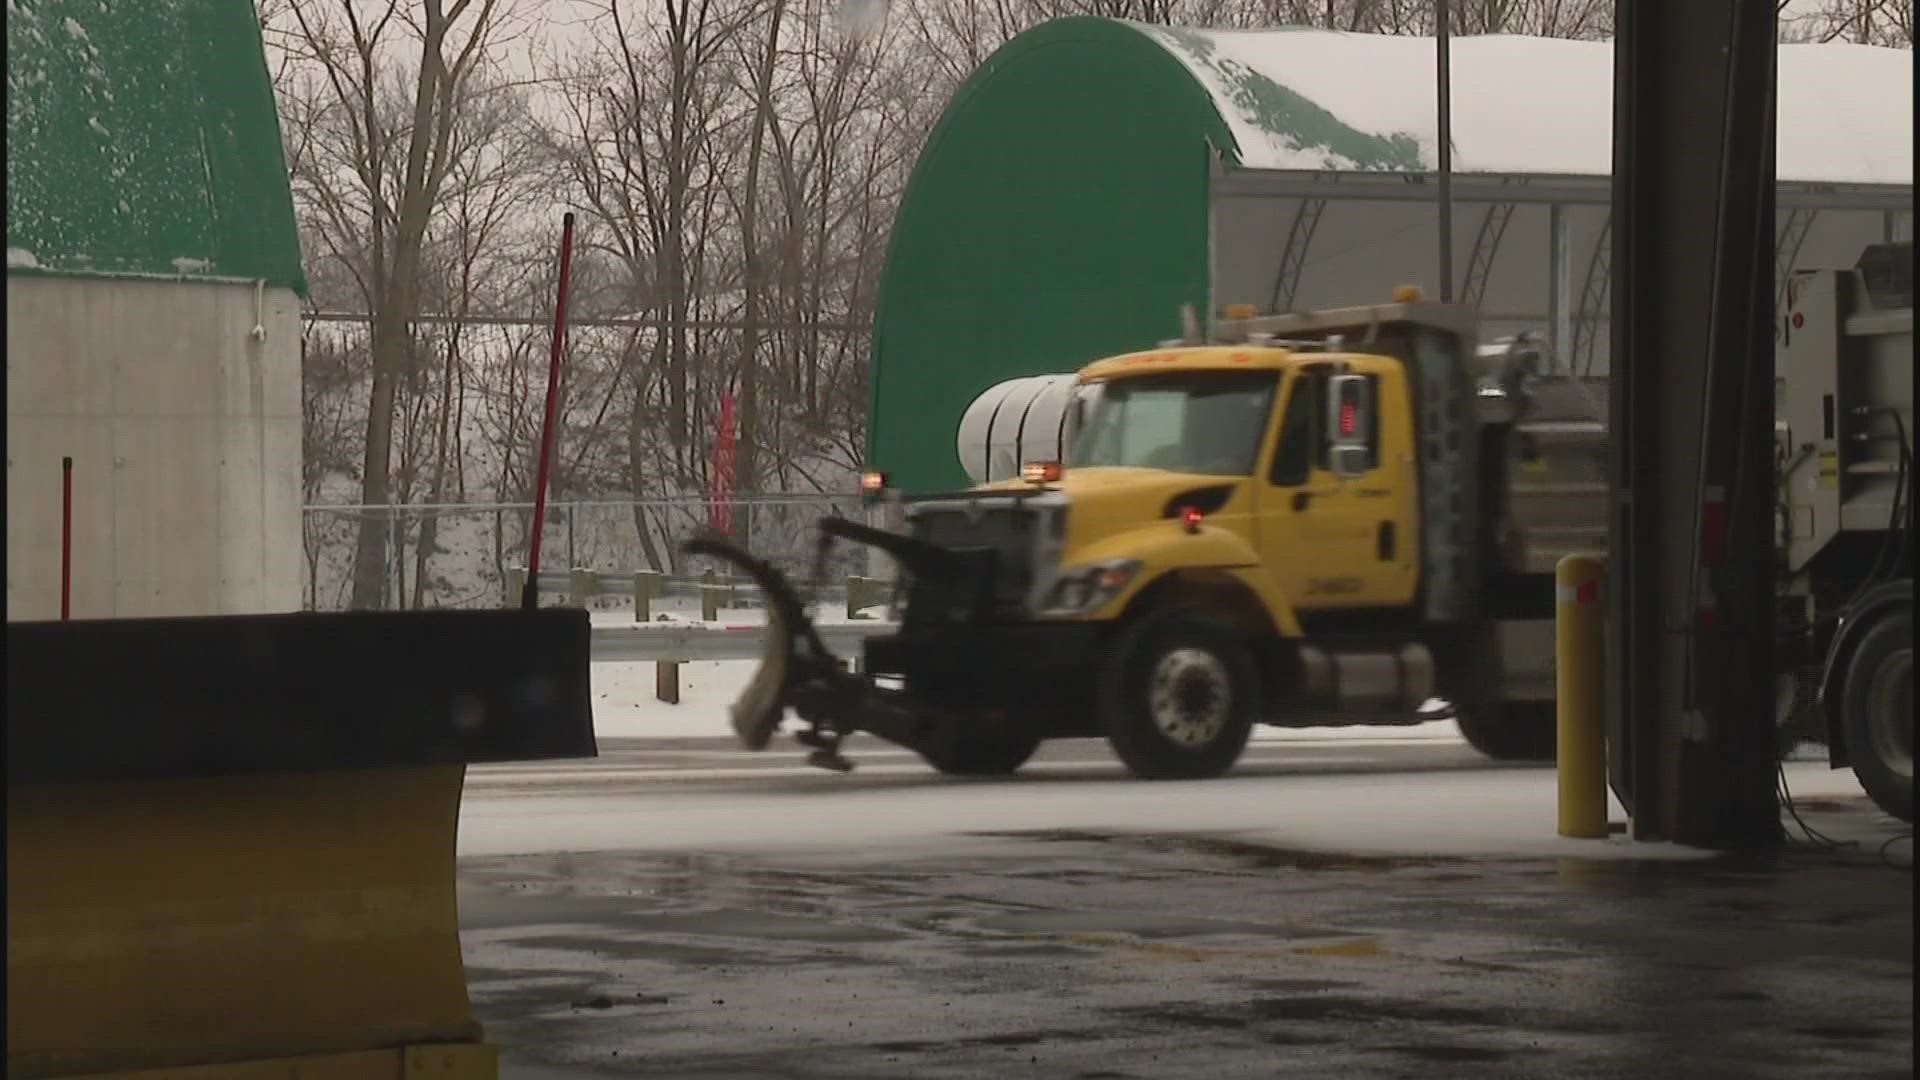 The City of Columbus is working to recruit "snow warriors" from various city departments to help keep roads clear ahead of the winter season.